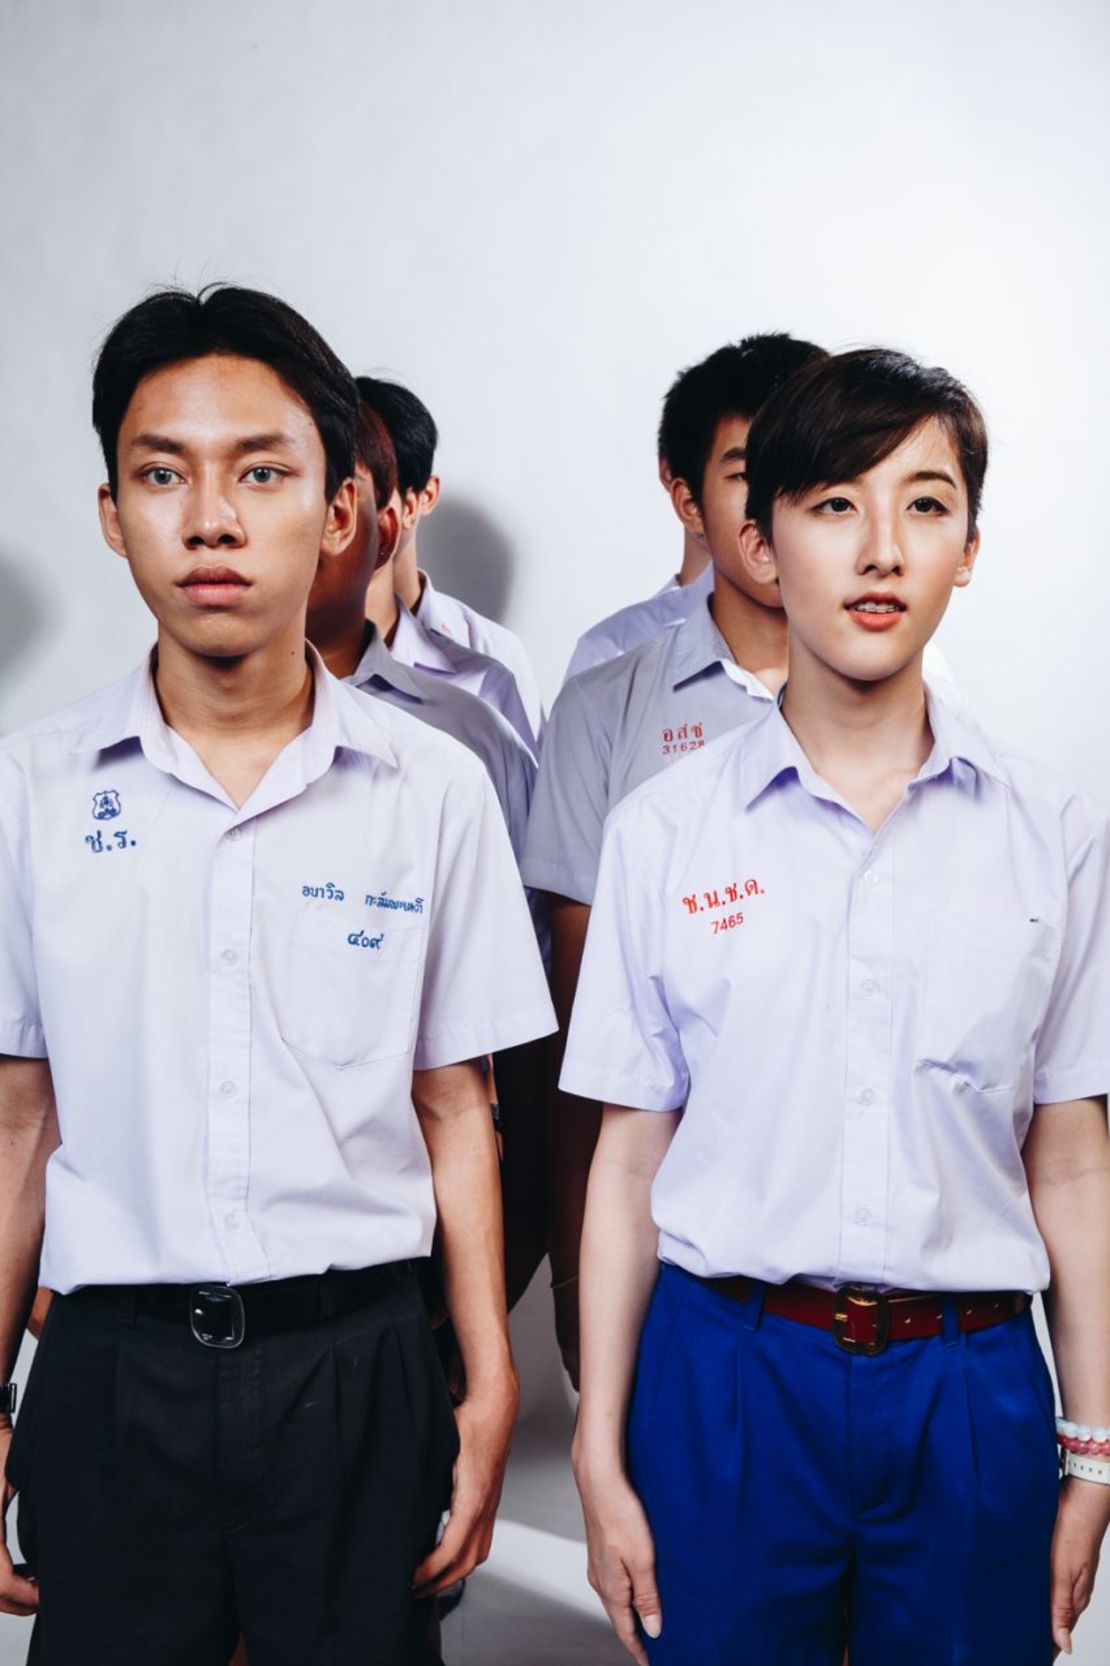 Thai photographer Watsamon Tri-yasakda used school uniforms to express young people's frustration with conformity. 